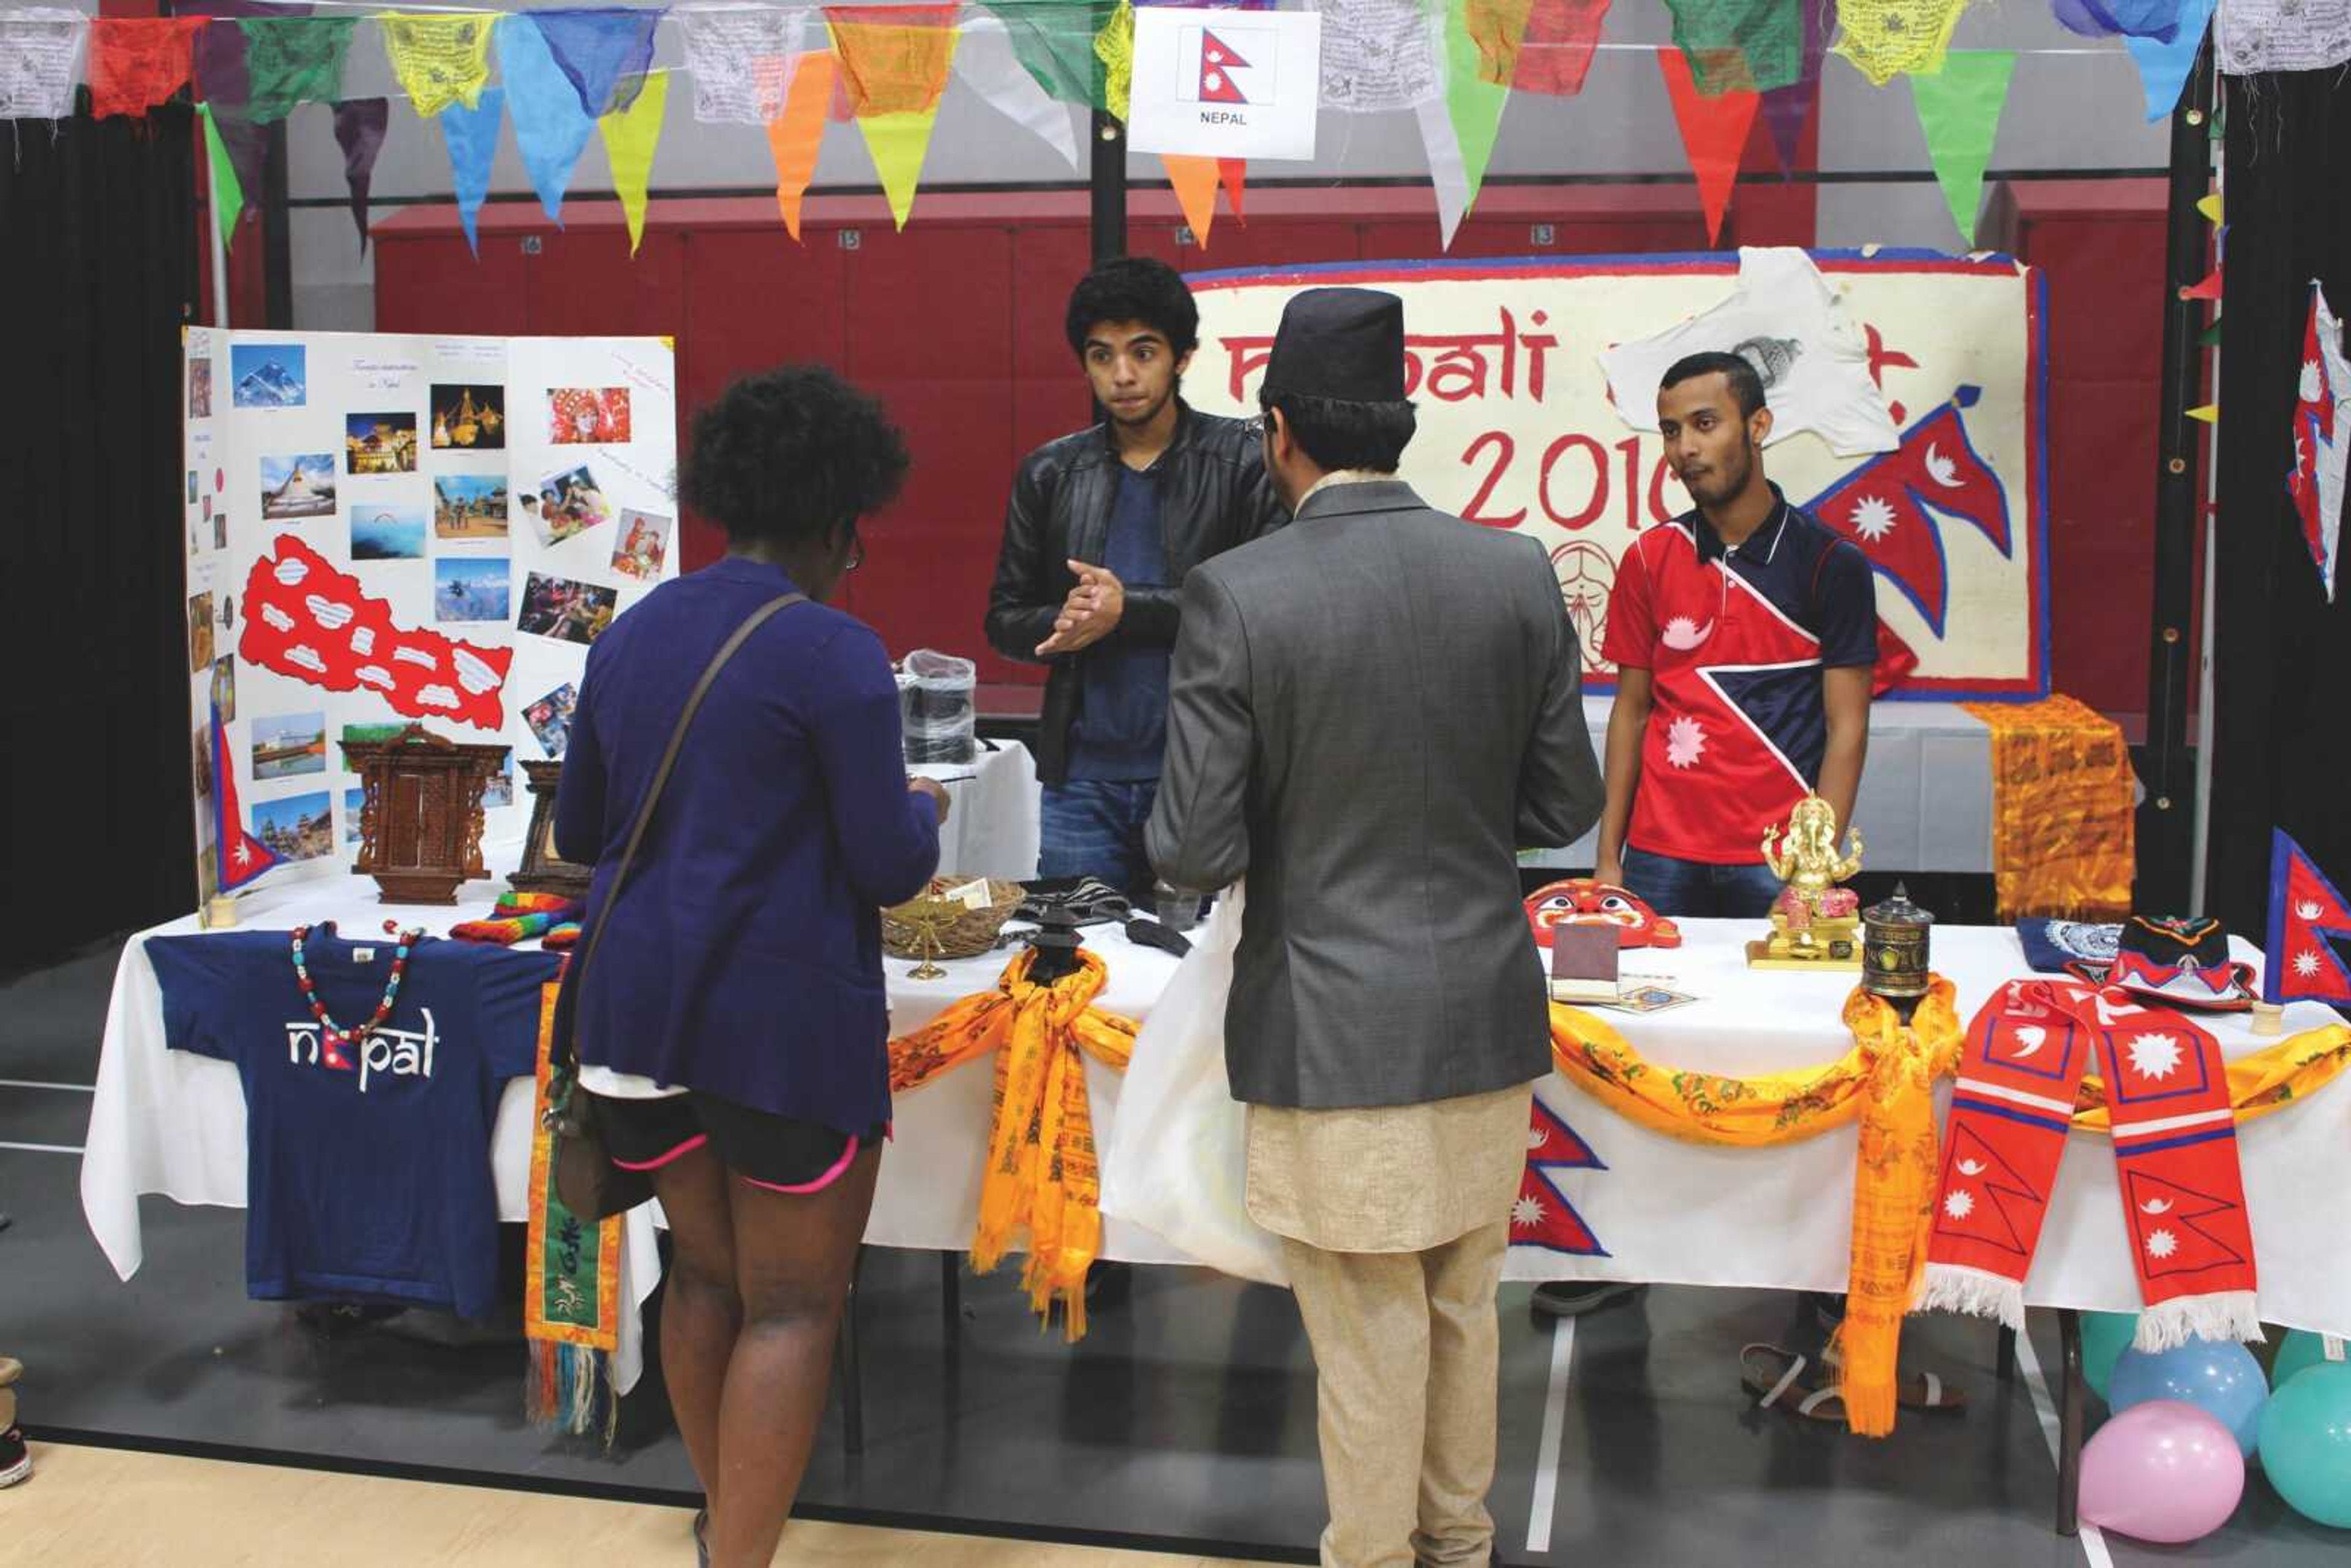 Students check out the Nepal booth at the International Festival on April 23.